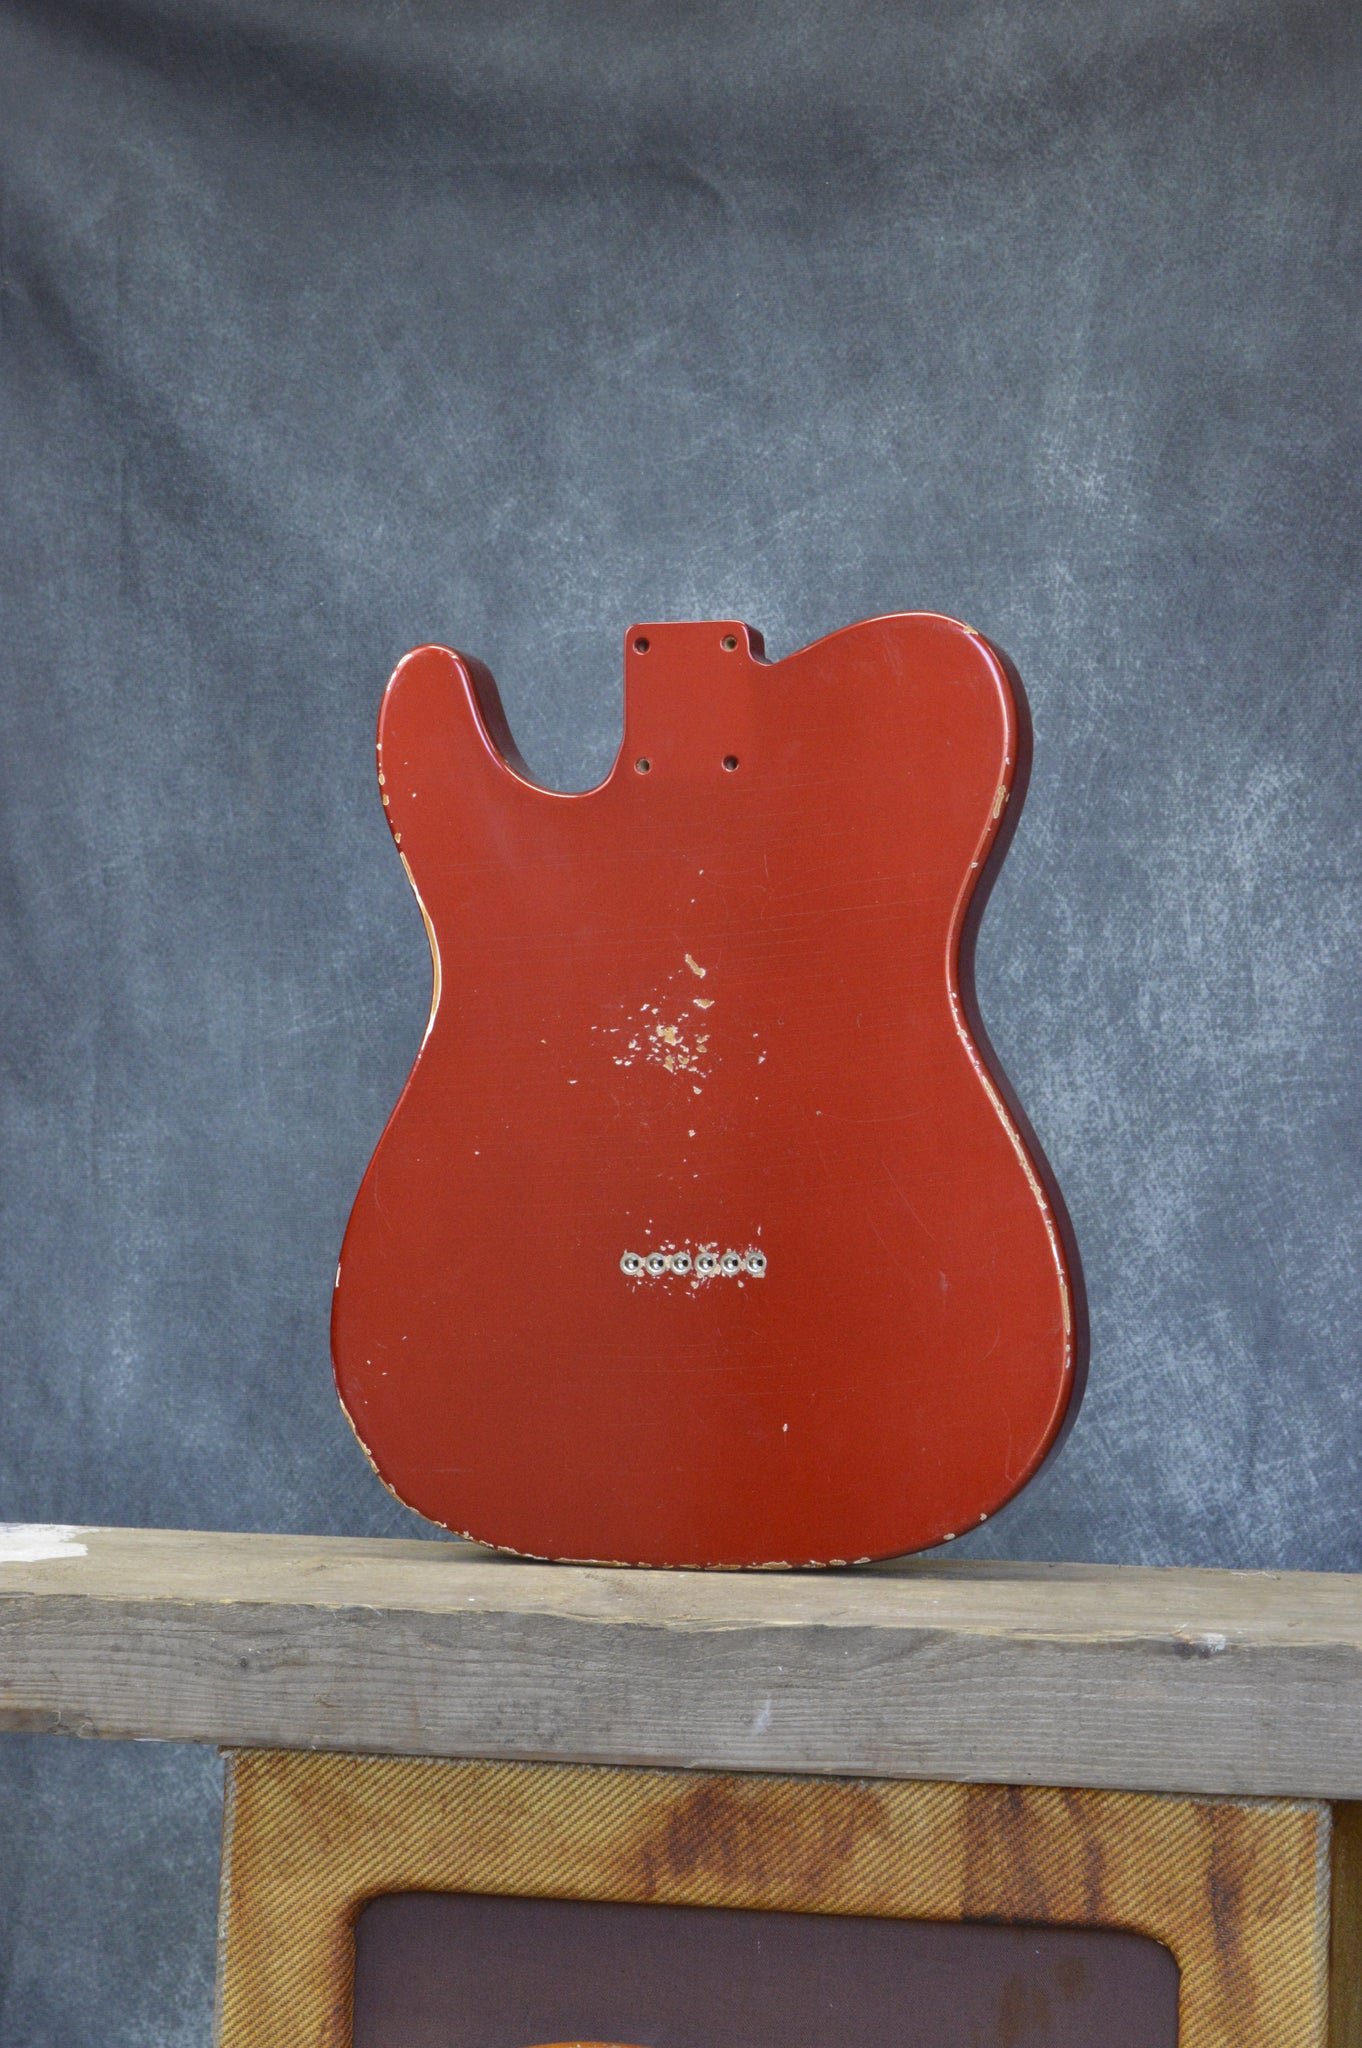 Candy Apple Red Thinline Body GE0386